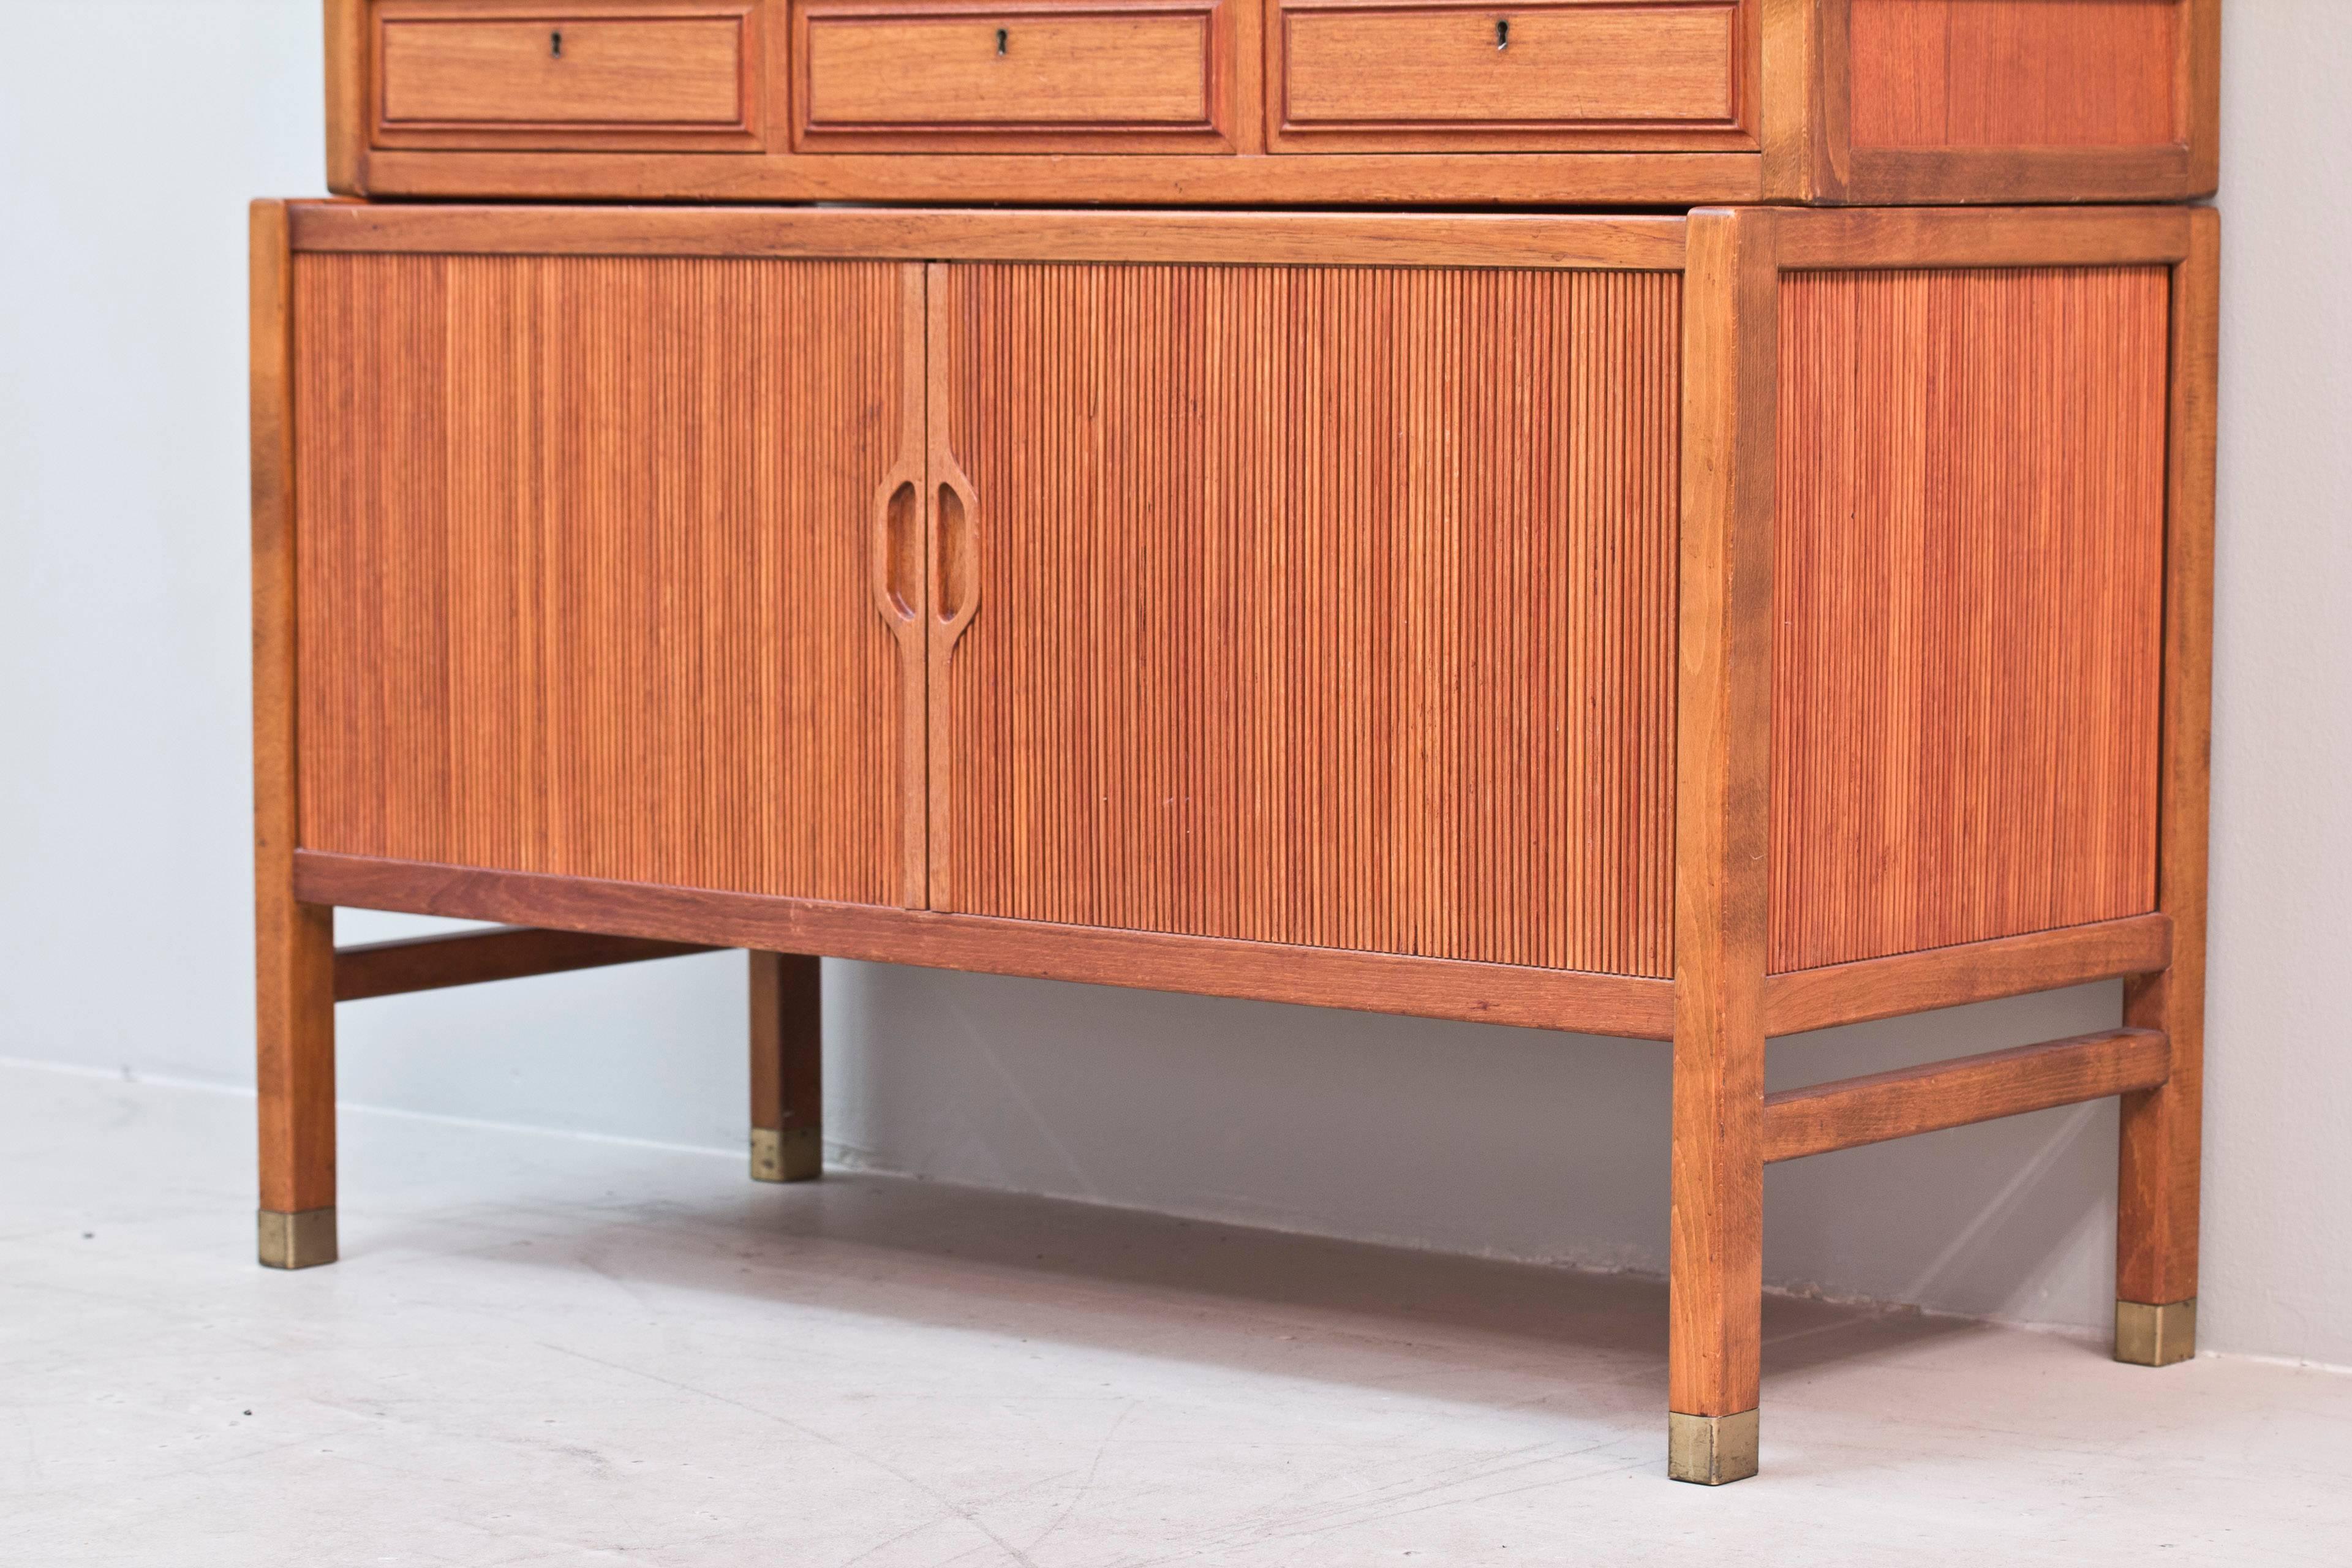 Cabinet by Carl-Axel Acking, Bodafors In Good Condition In Stockholm, Sweden